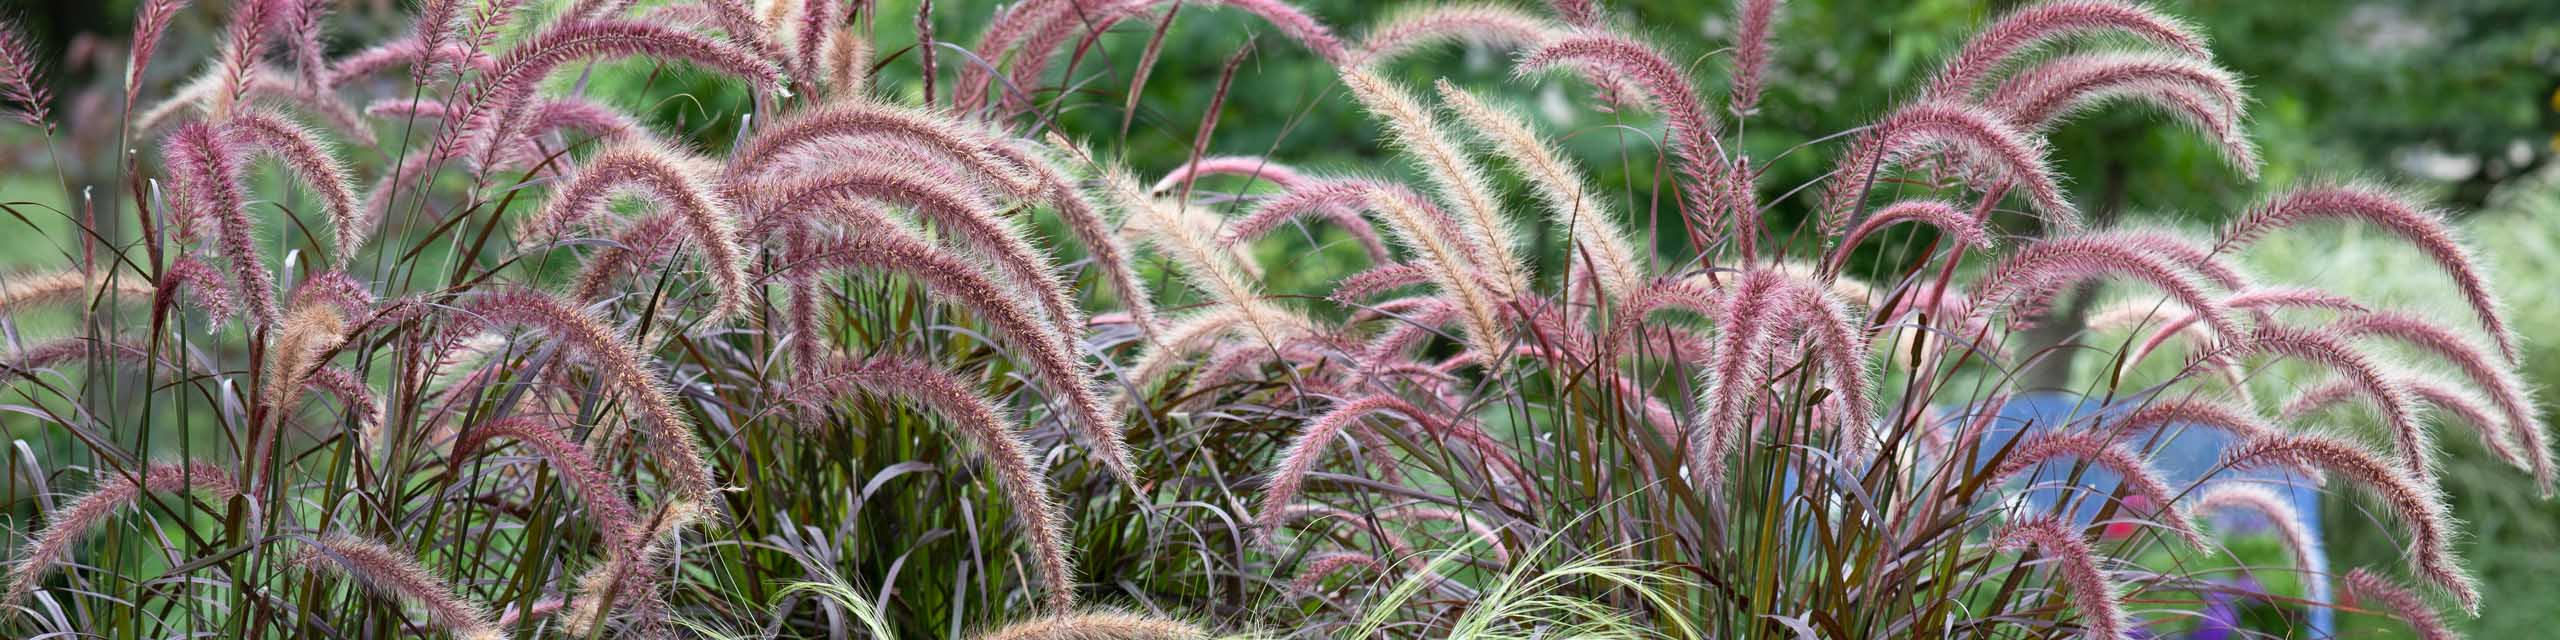 Various ornamental fountain grasses at the height of summer.